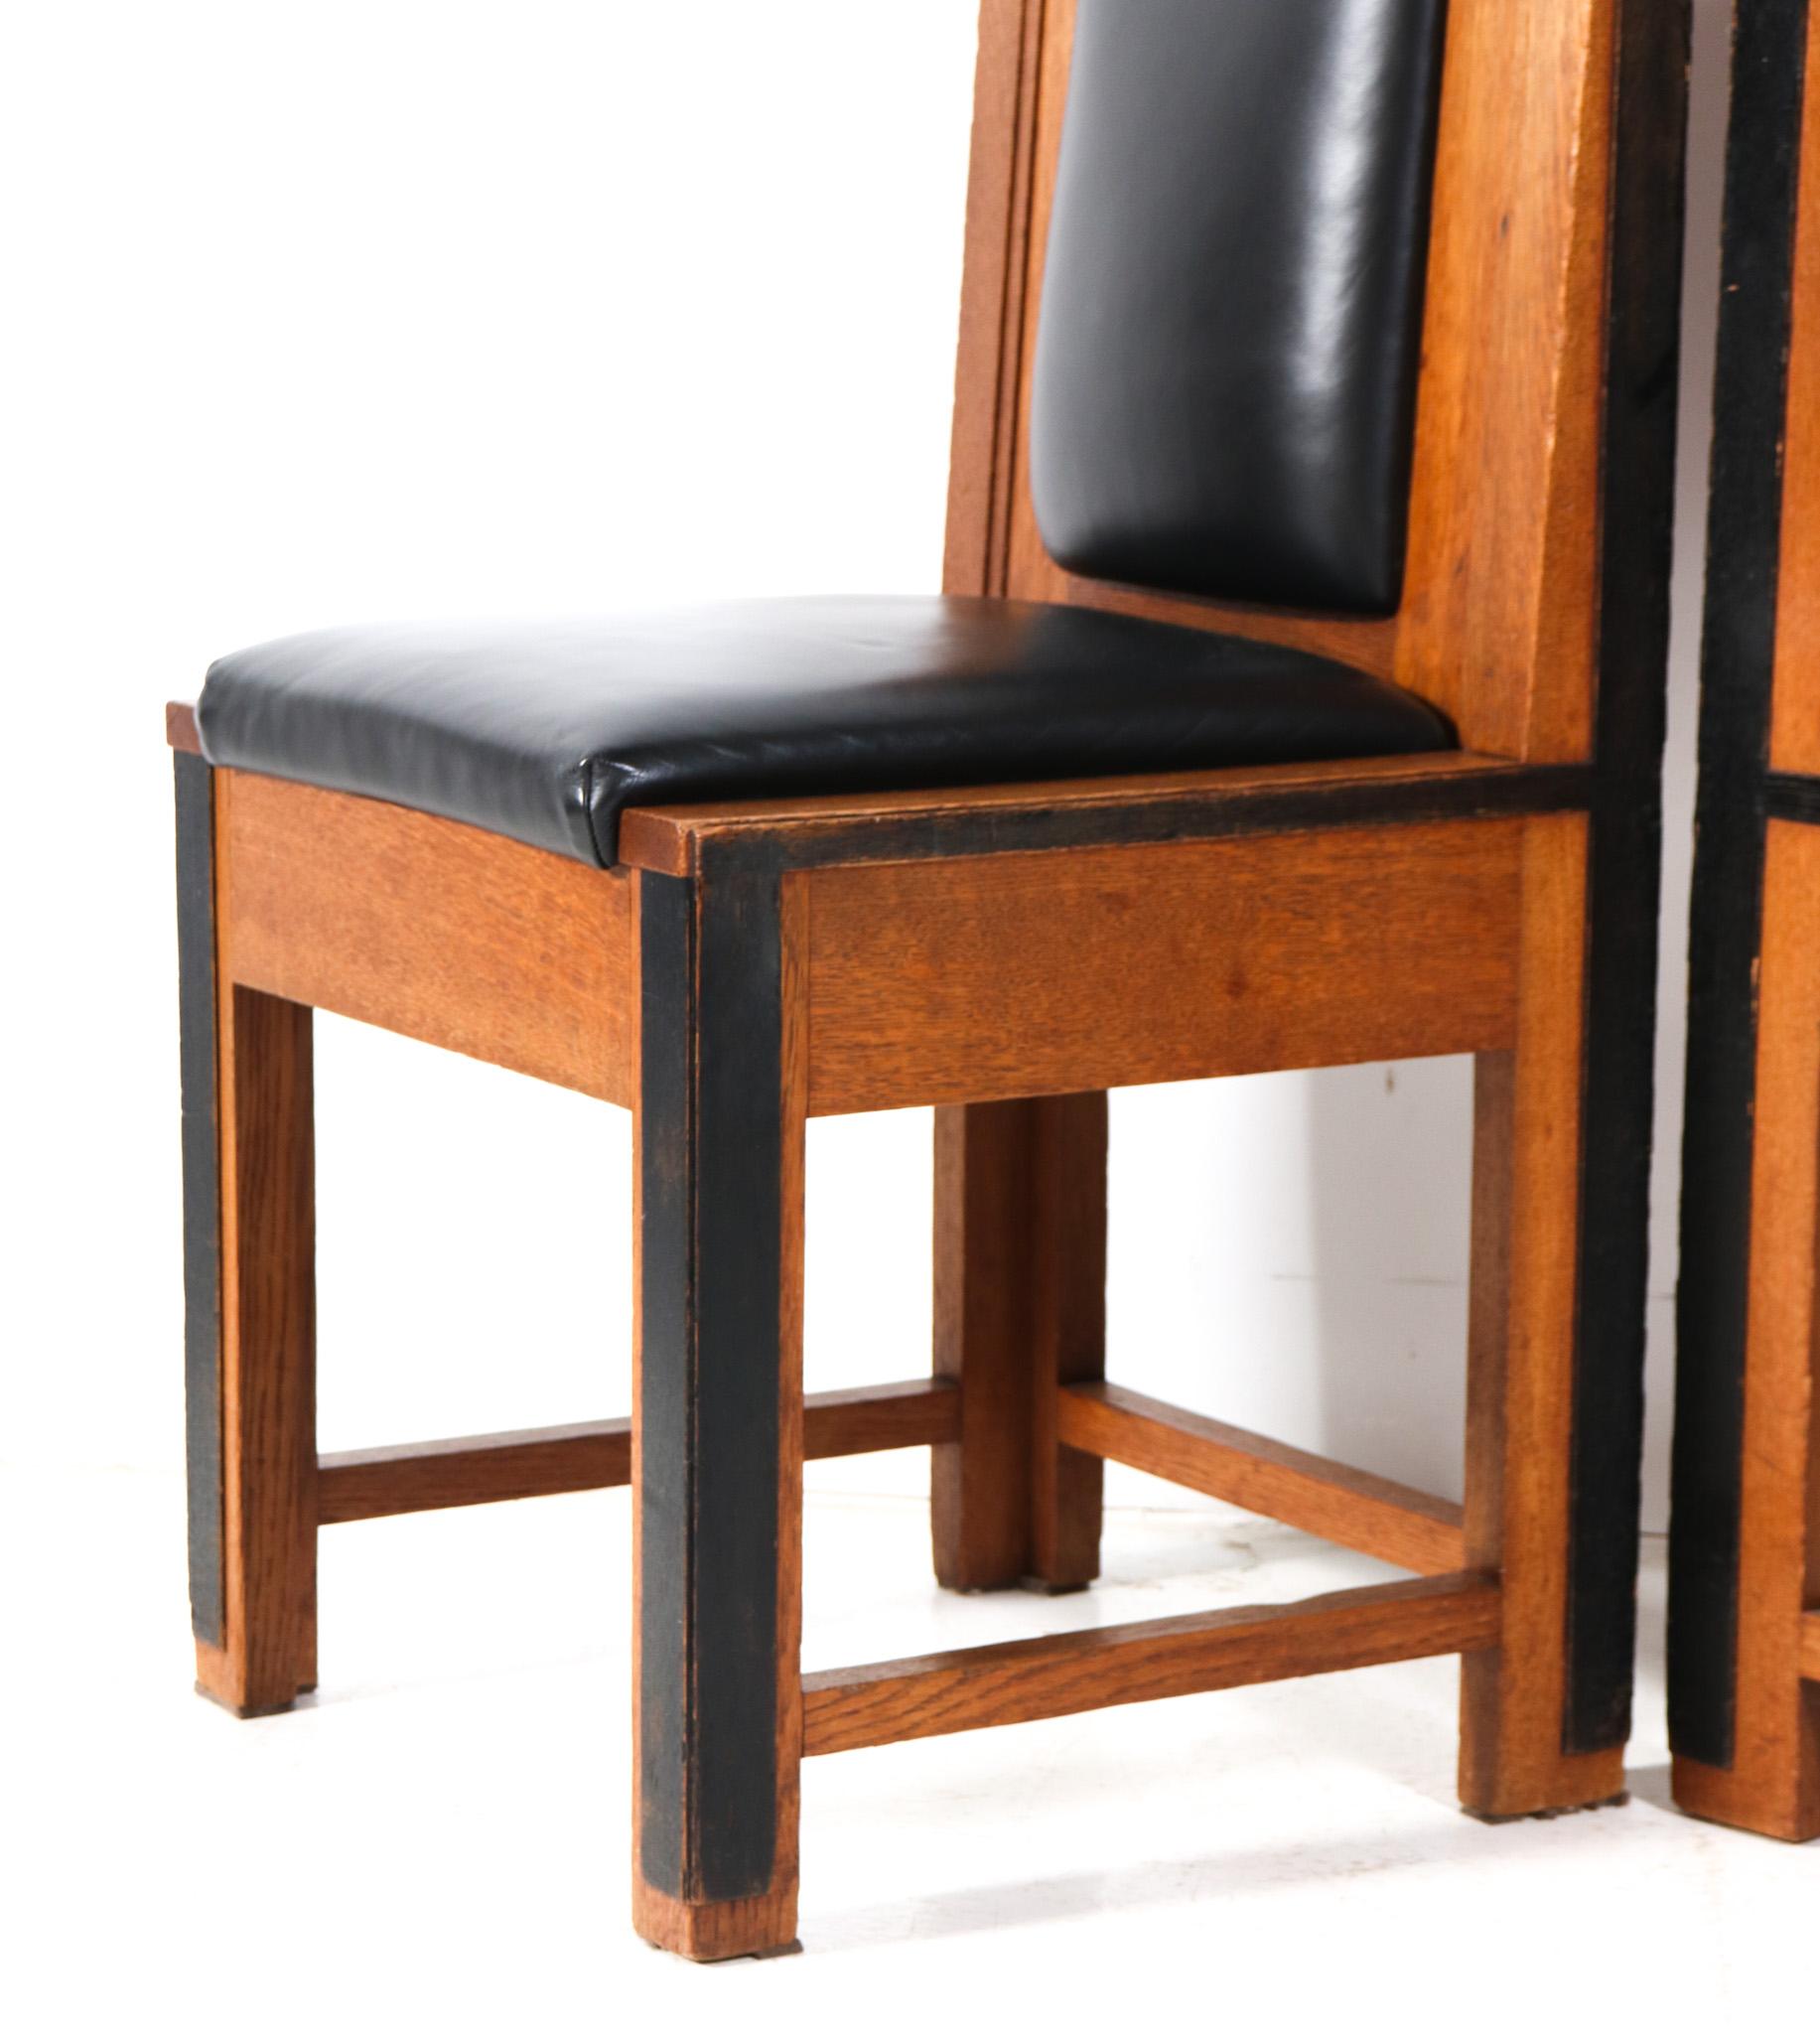 Eight Oak Art Deco Modernist Chairs by Fa. Randoe Haarlem, 1920s In Good Condition For Sale In Amsterdam, NL